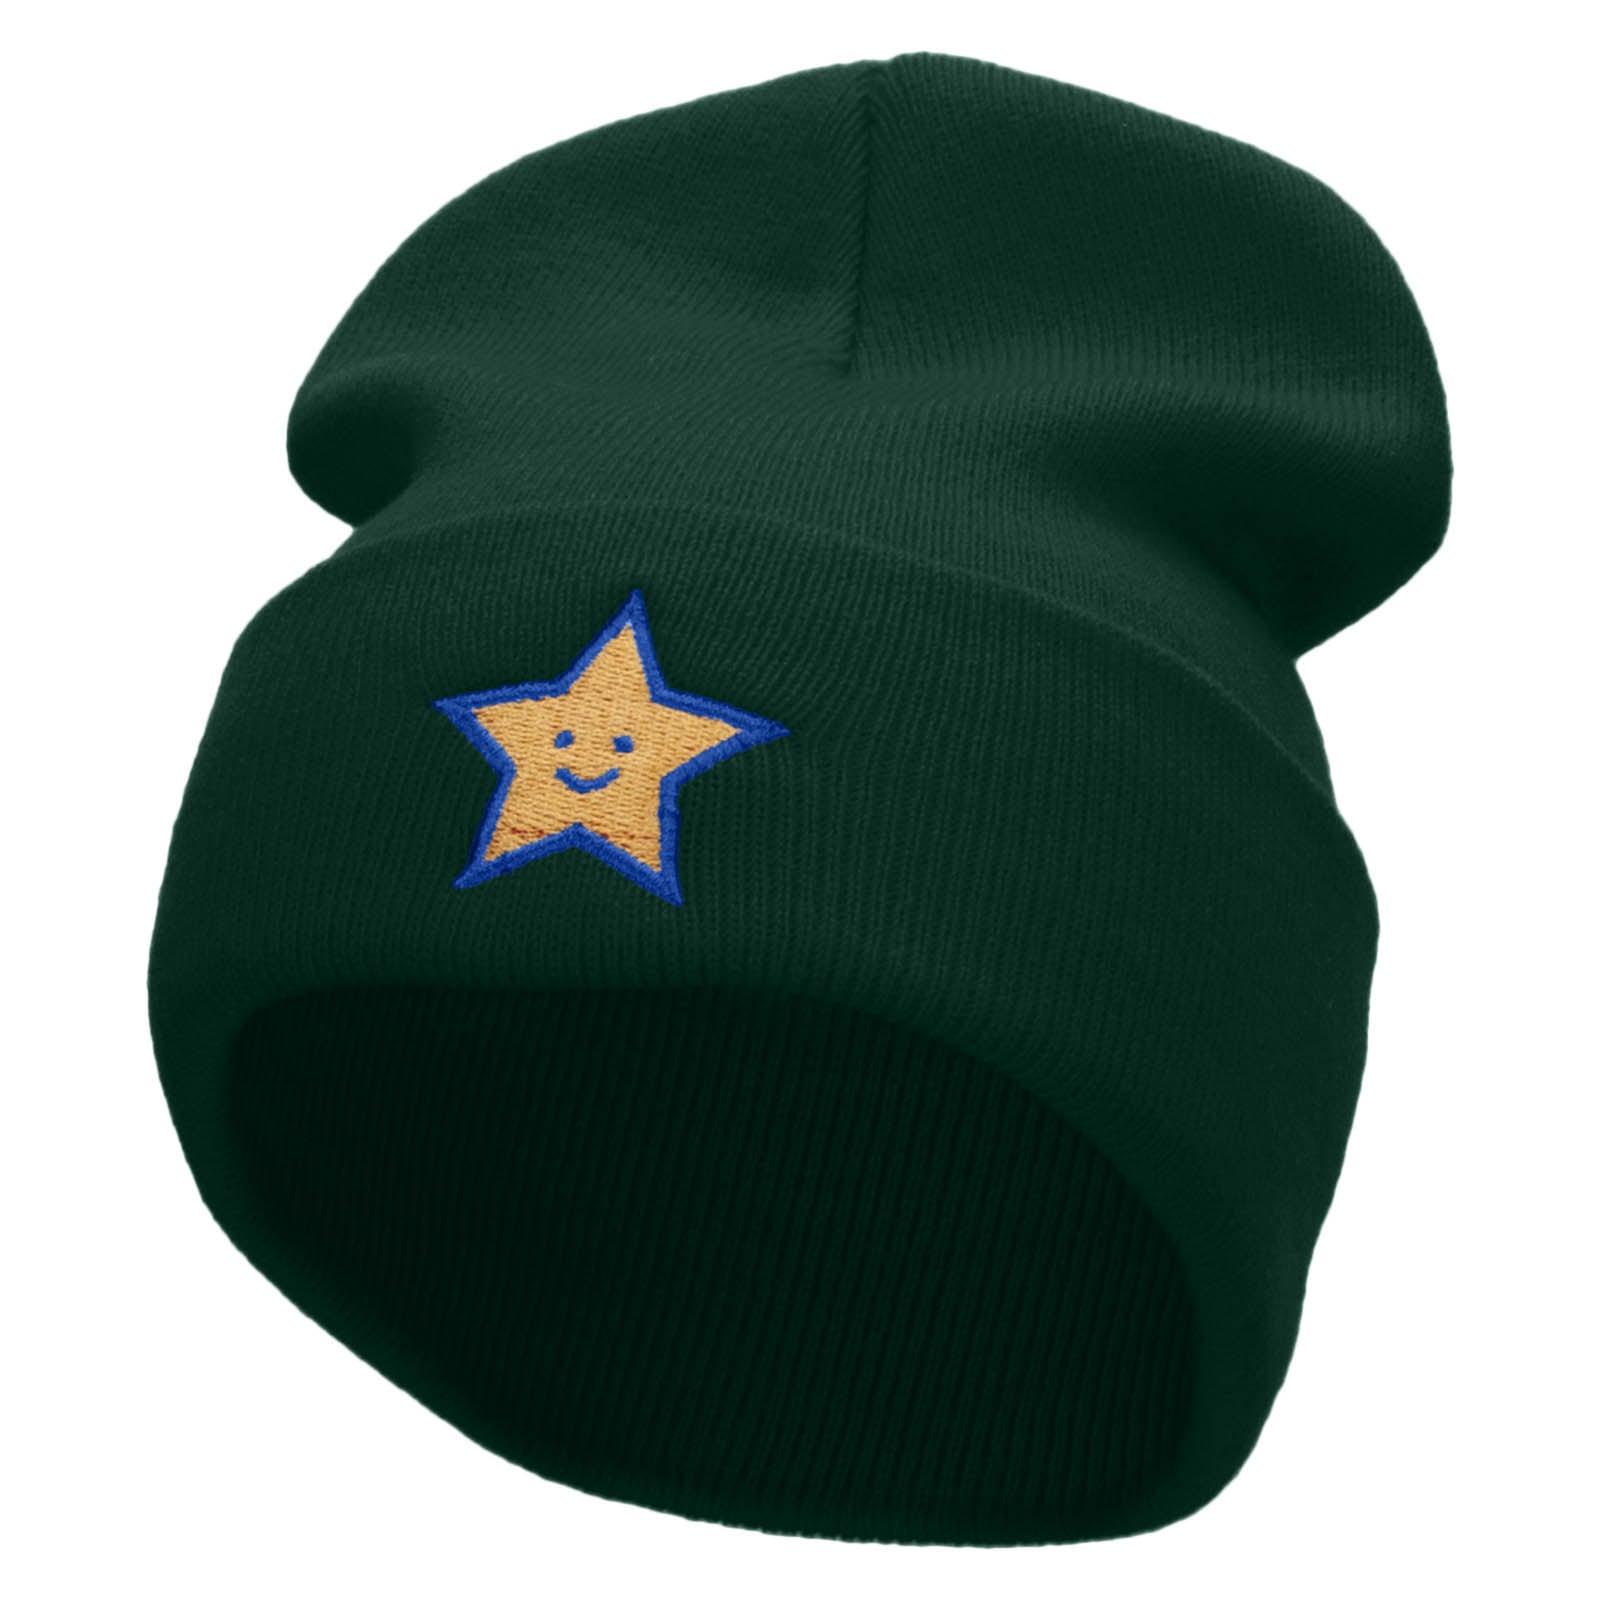 Super Star Embroidered 12 Inch Long Knitted Beanie - Dk Green OSFM